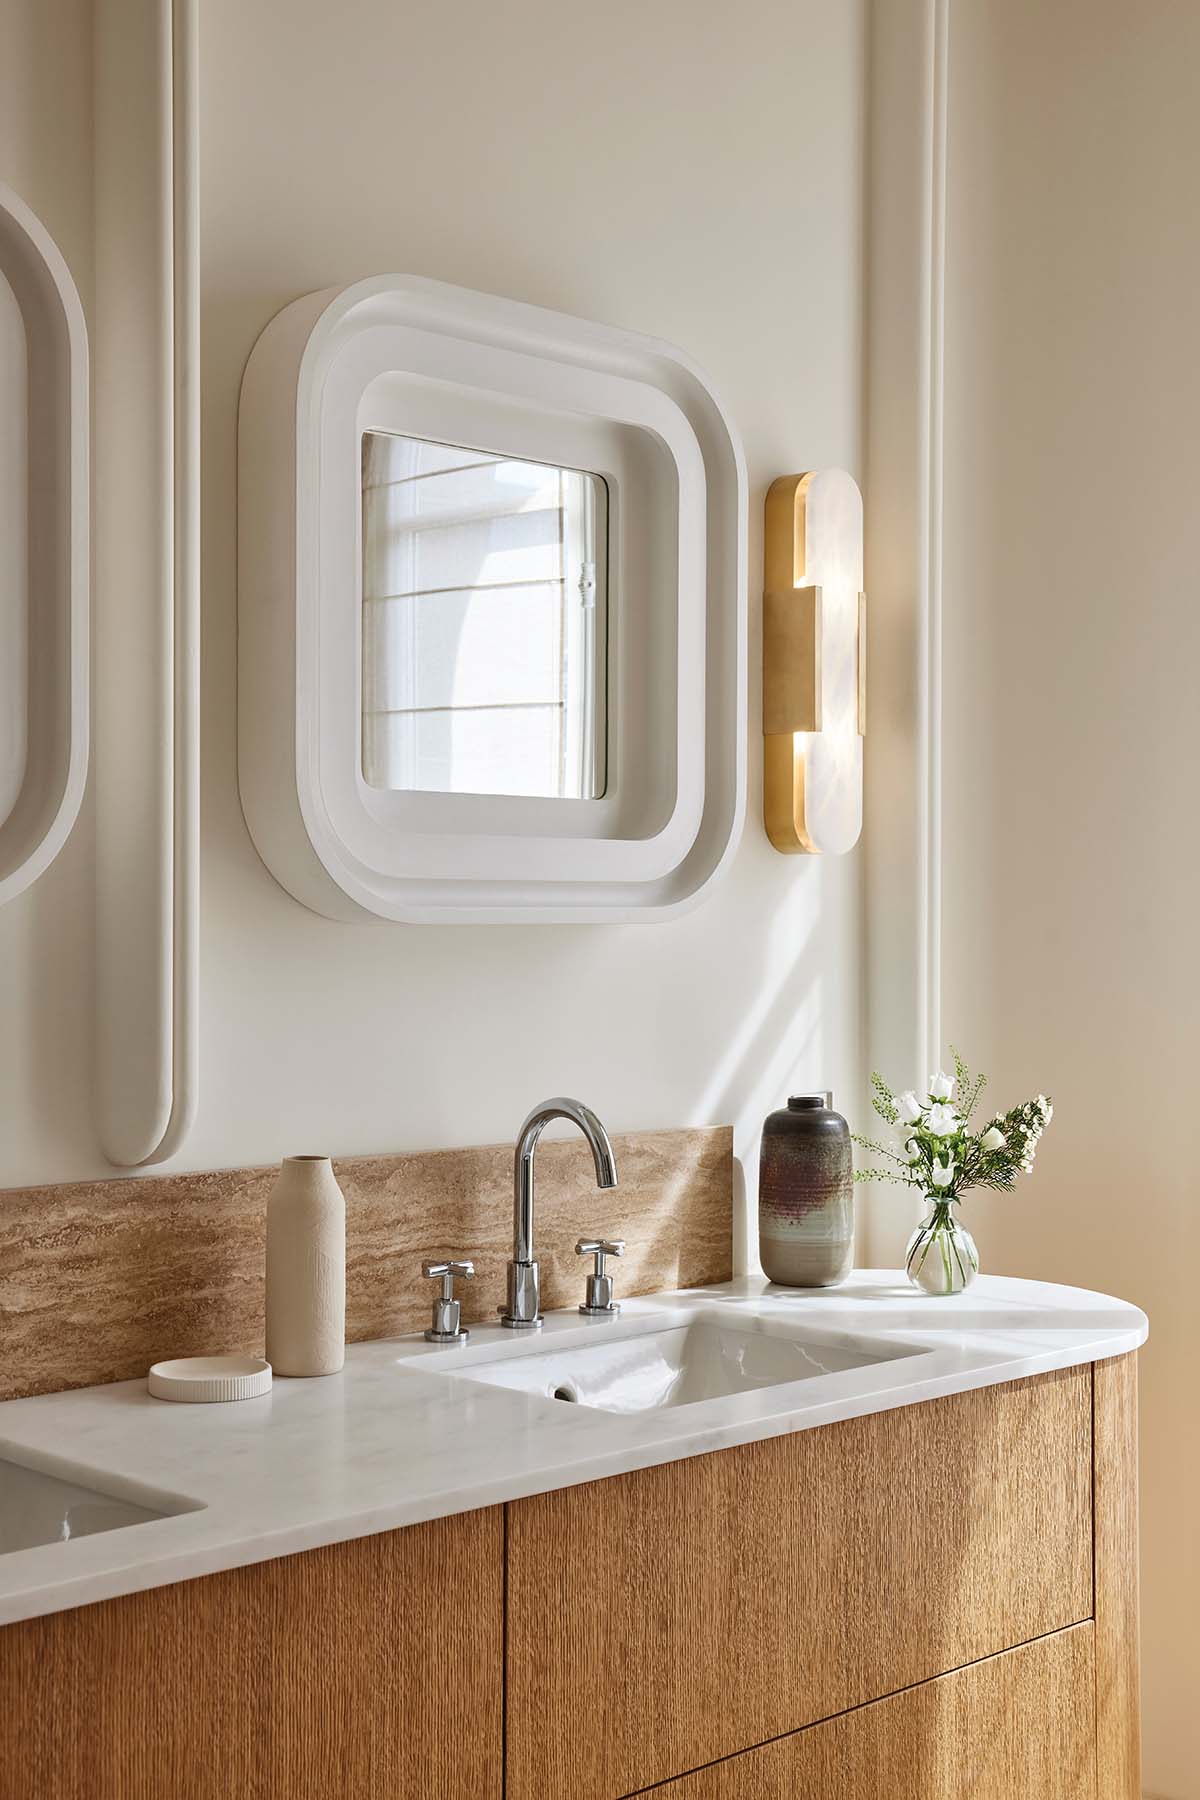 A bathroom in Paris, designed by Fabrice Jean featuring oak and plaster accents